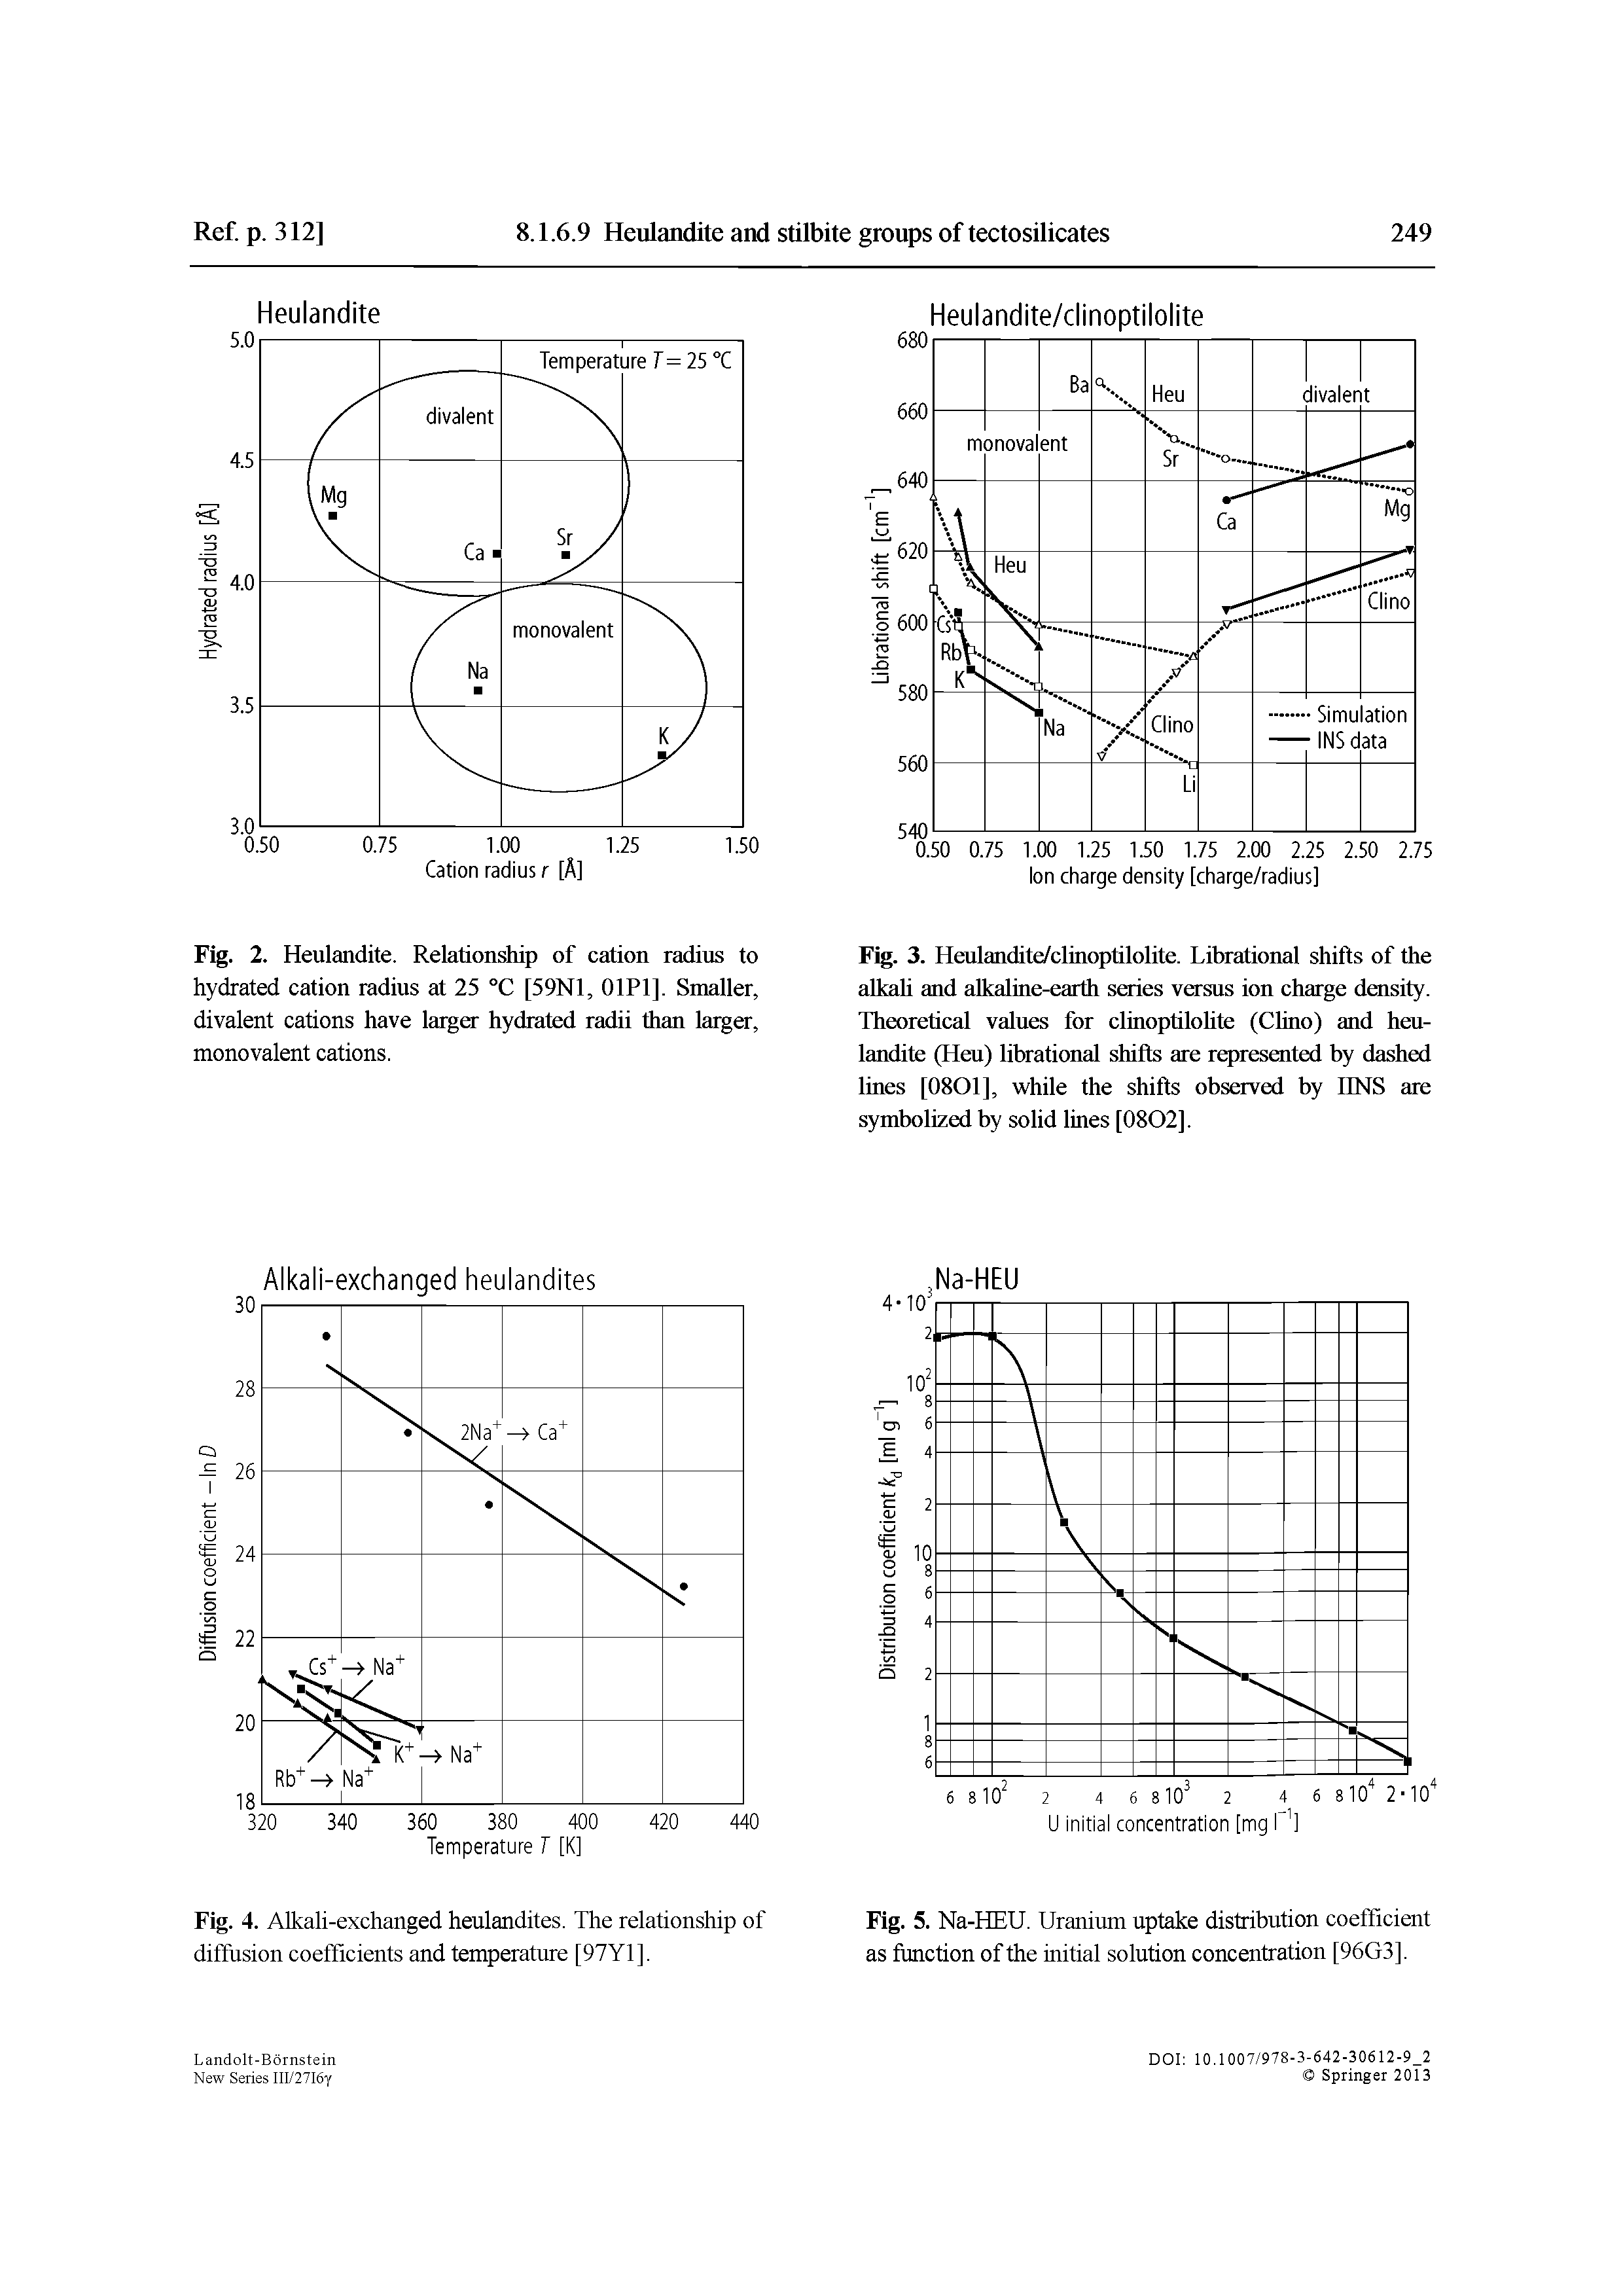 Fig. 3. Heulandite/clinoptilolite. Librational shifts of the alkati and alkaline-earfh series versus ion charge density. Theoretical values for clinoptilolite (Chno) and heulandite (Heu) librational shifts are represented by dashed lines [0801], while the shifts observed by HNS are symbolized by solid lines [0802].